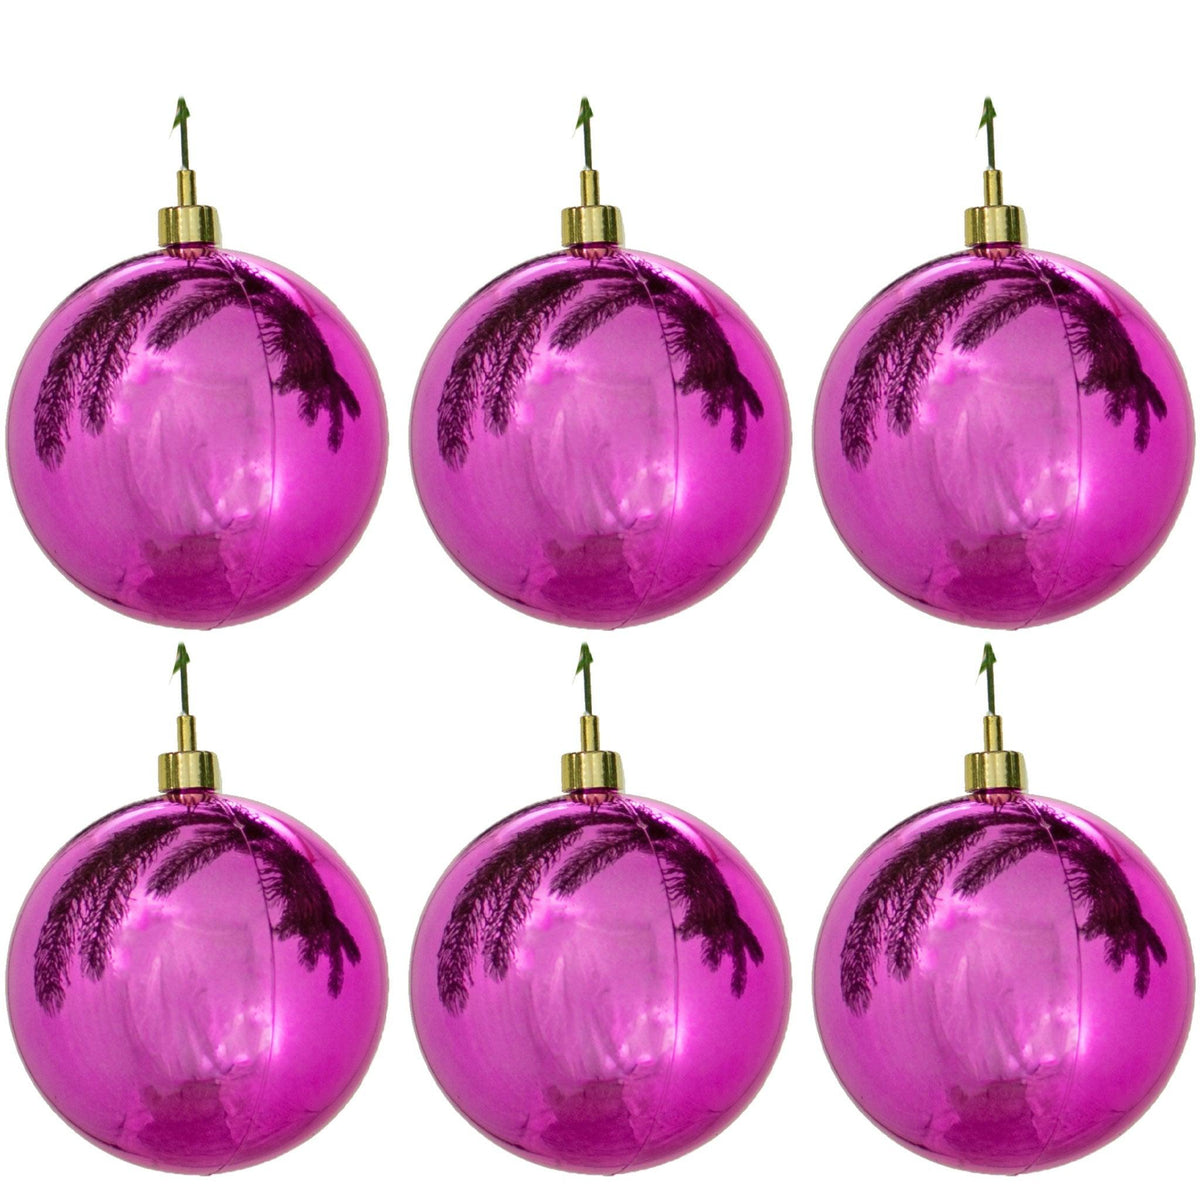 Lee Display offers brand new Shiny Pink Plastic Ball Ornaments at wholesale prices for affordable Christmas Tree Hanging and Holiday Decorating on sale at leedisplay.com